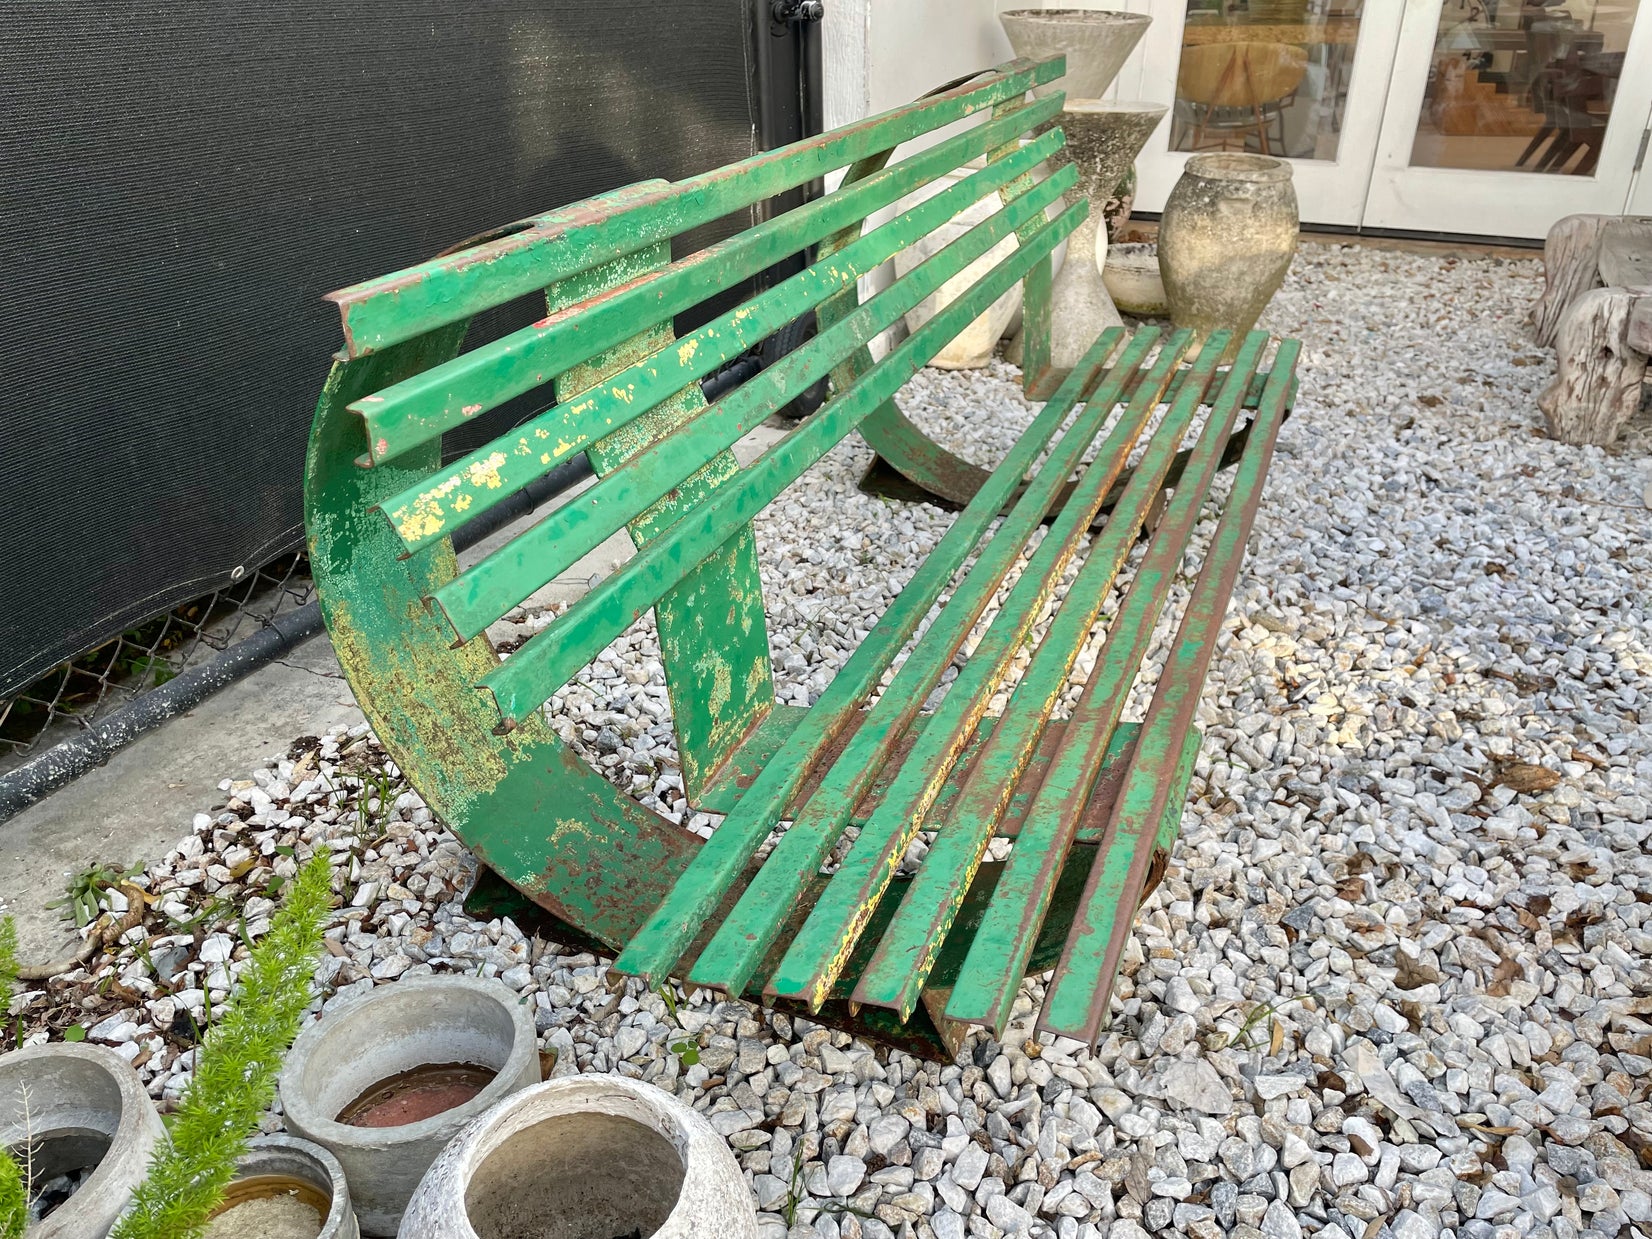 Galvanized Steel "Manelco" Bench, Cannes, France 1958